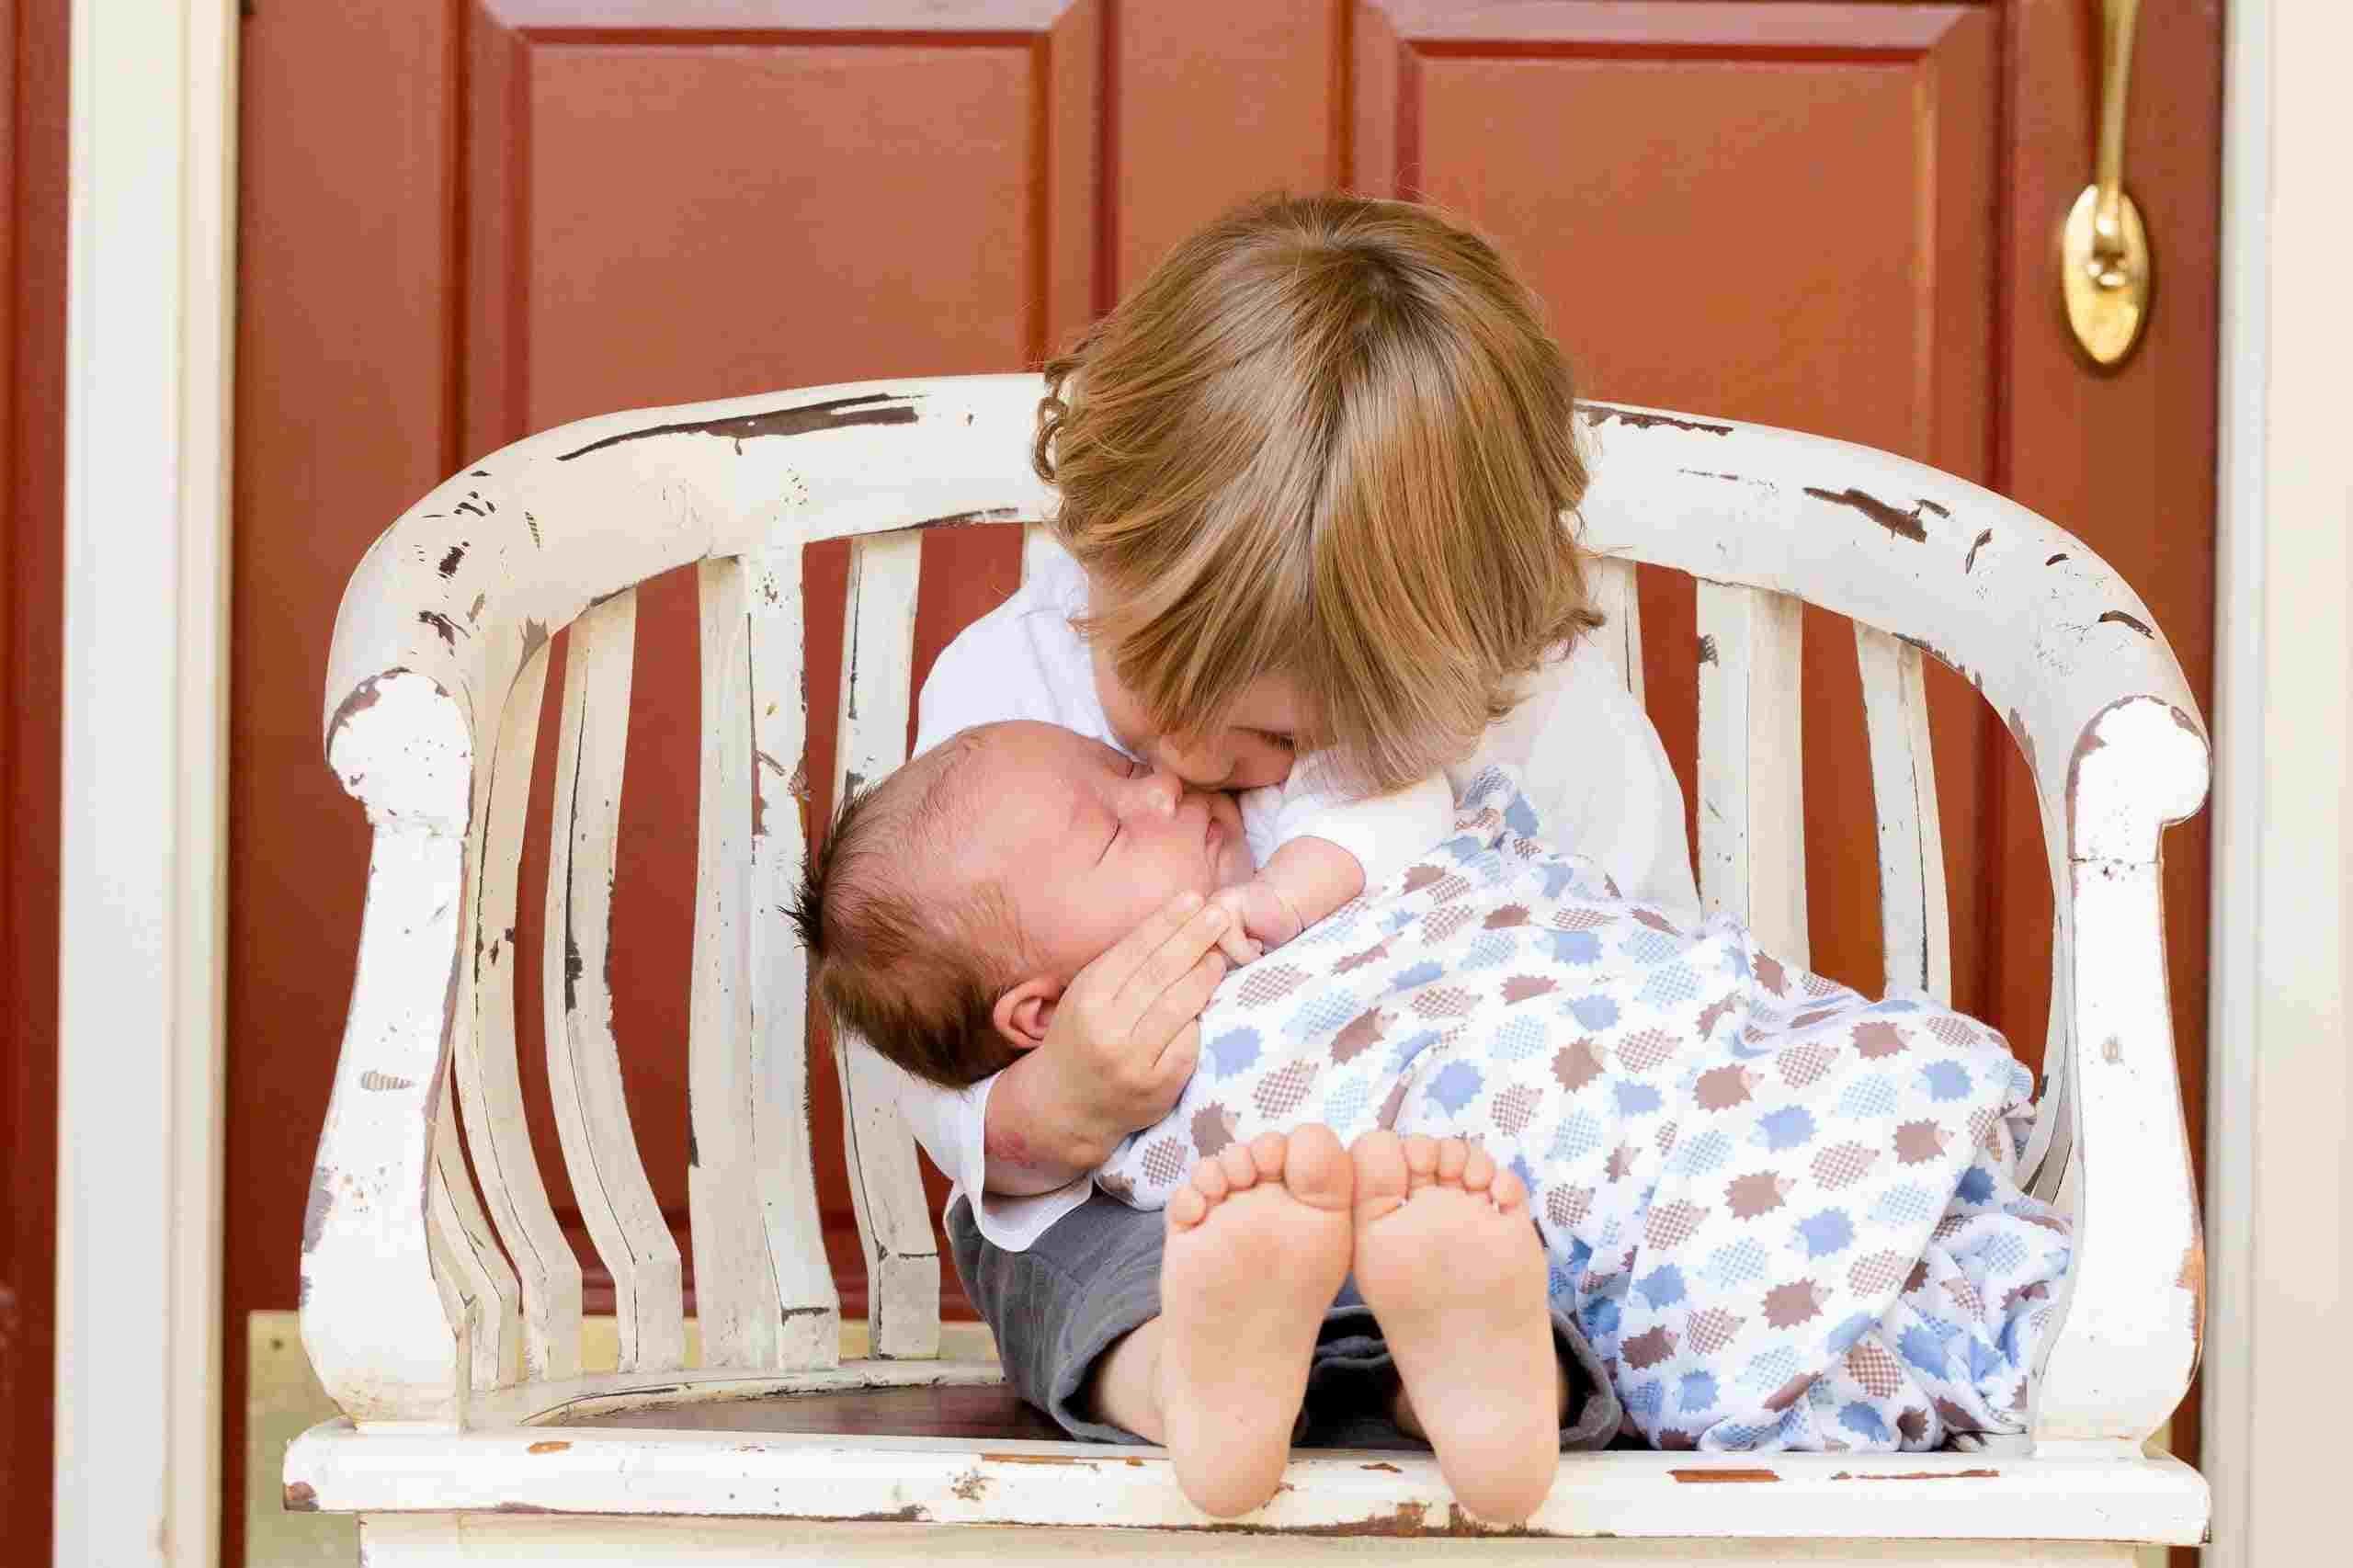 A toddler sat on a chair holding his baby sibling and kissing on the cheek.